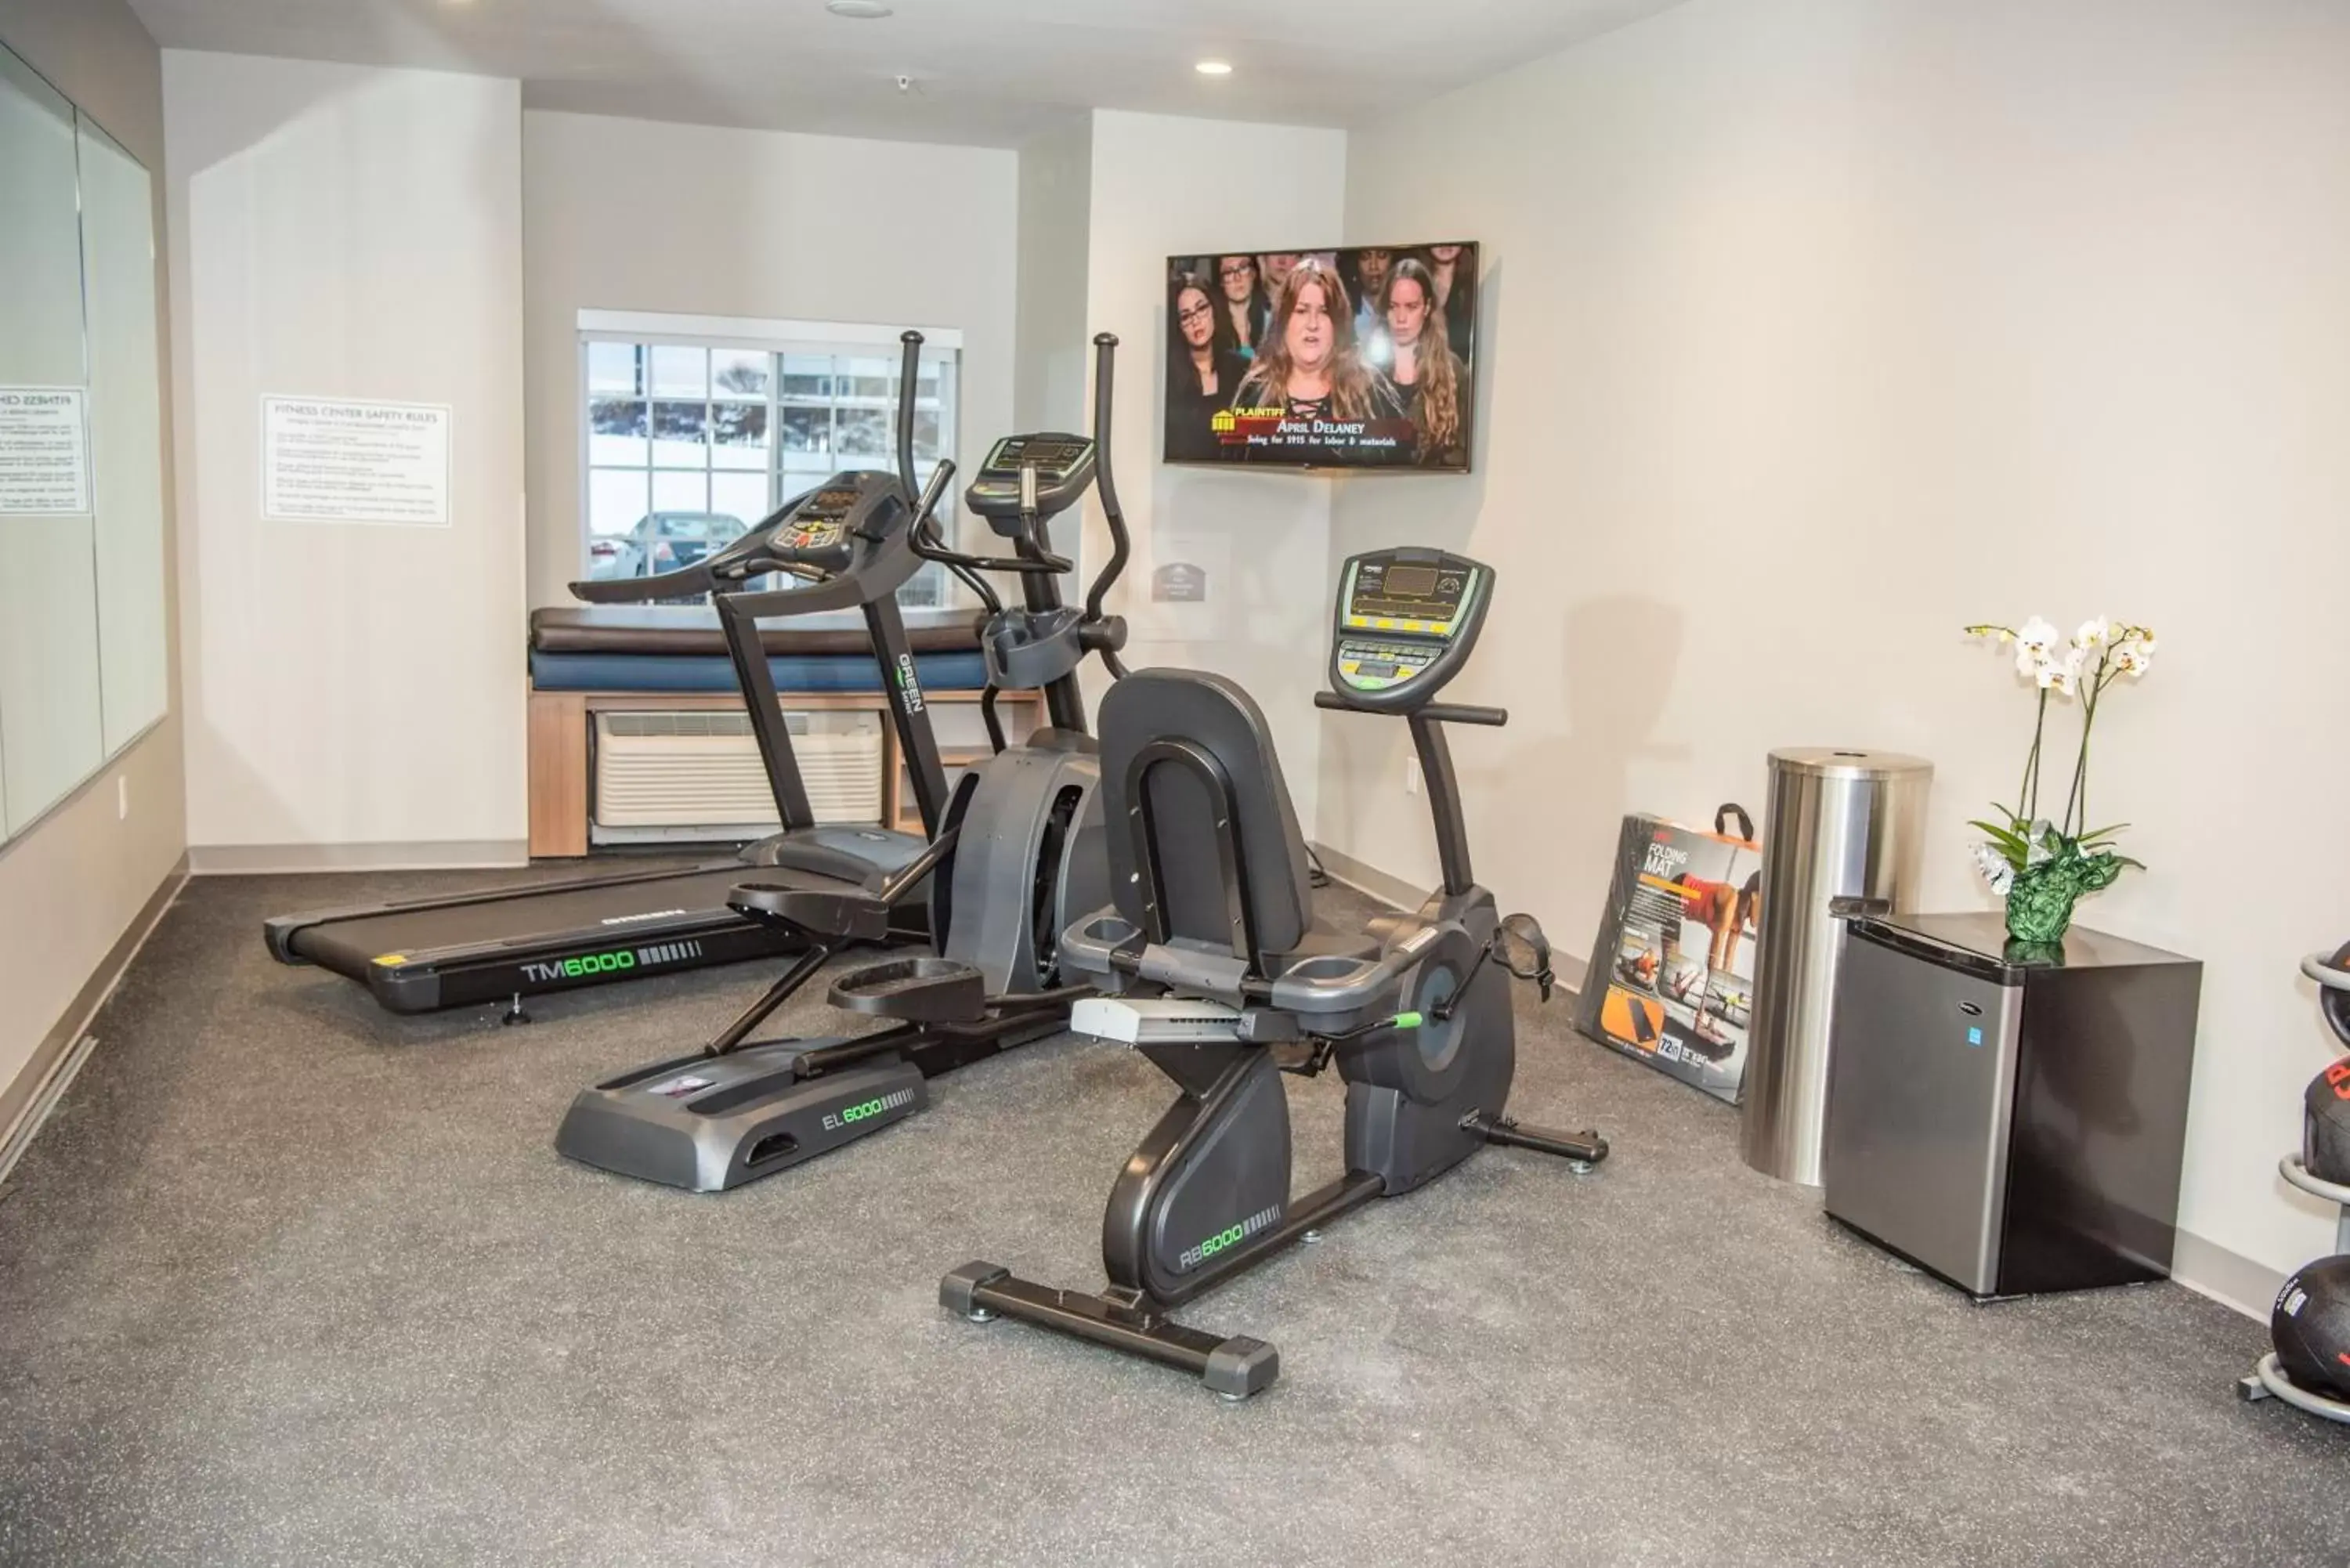 Fitness centre/facilities, Fitness Center/Facilities in Microtel Inn & Suites by Wyndham Carlisle